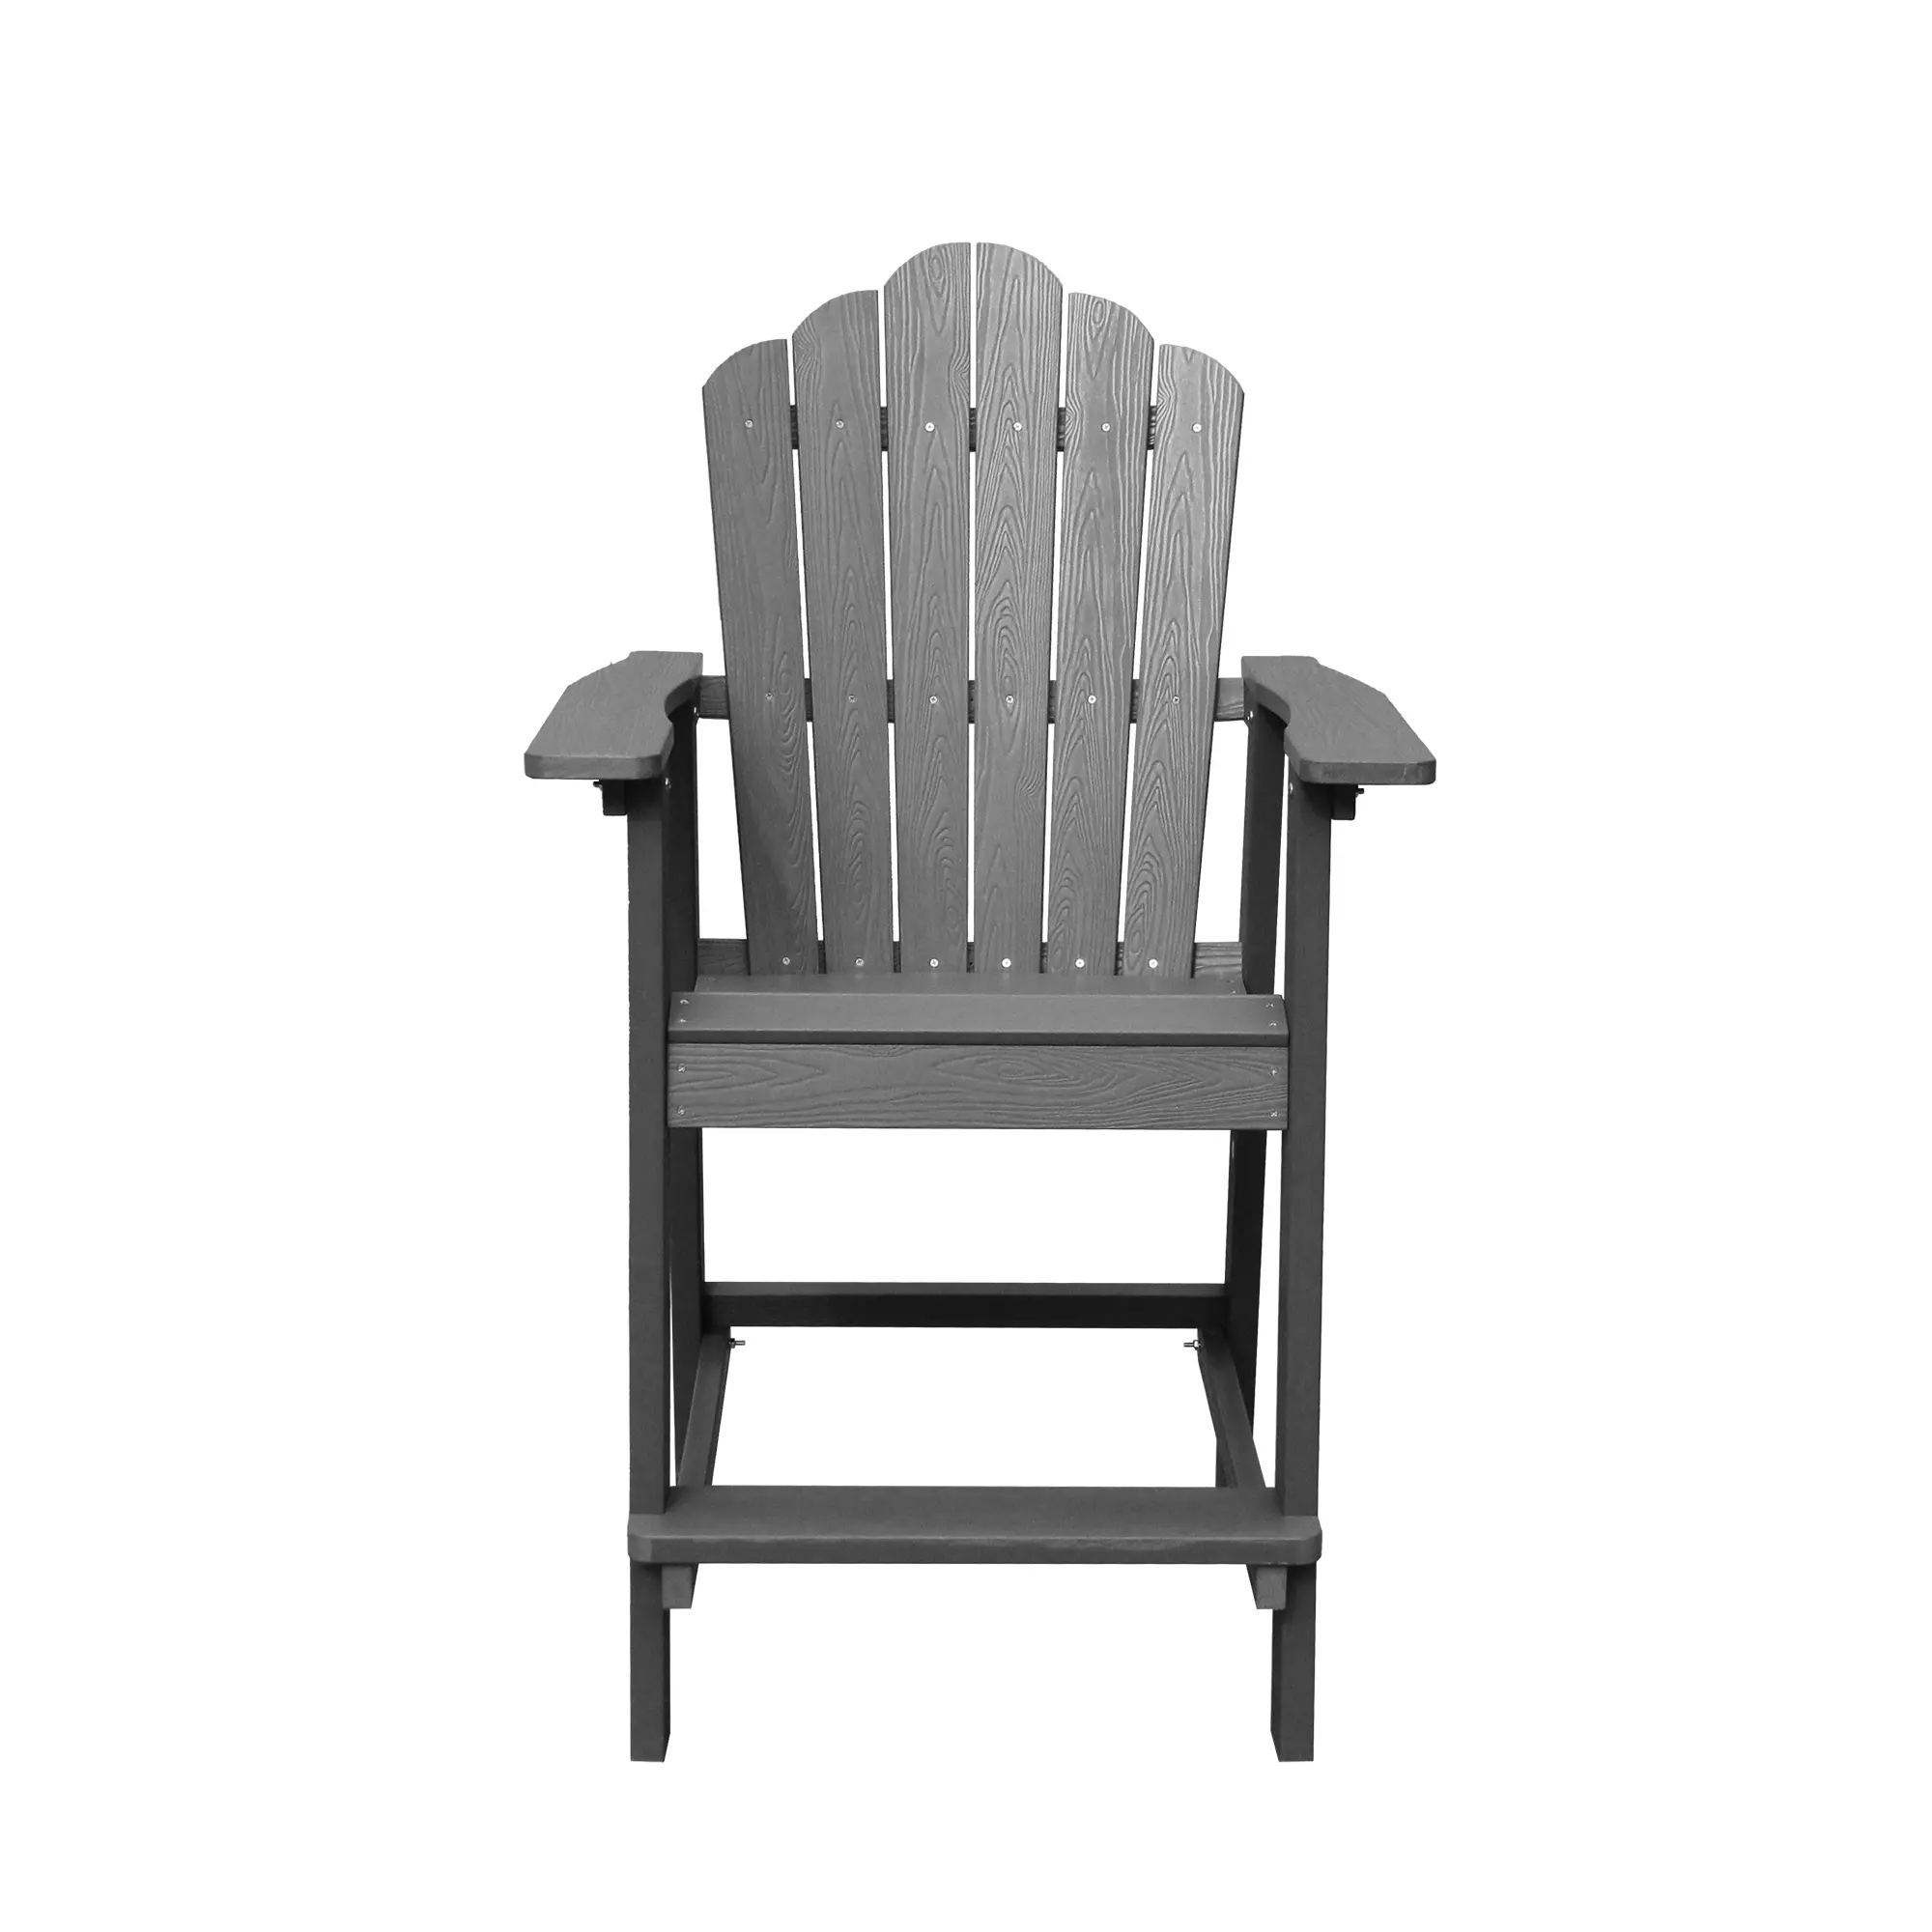 MondOutdoor Tall Adirondack Chair Bar Stool for Your Deck Front Porch 